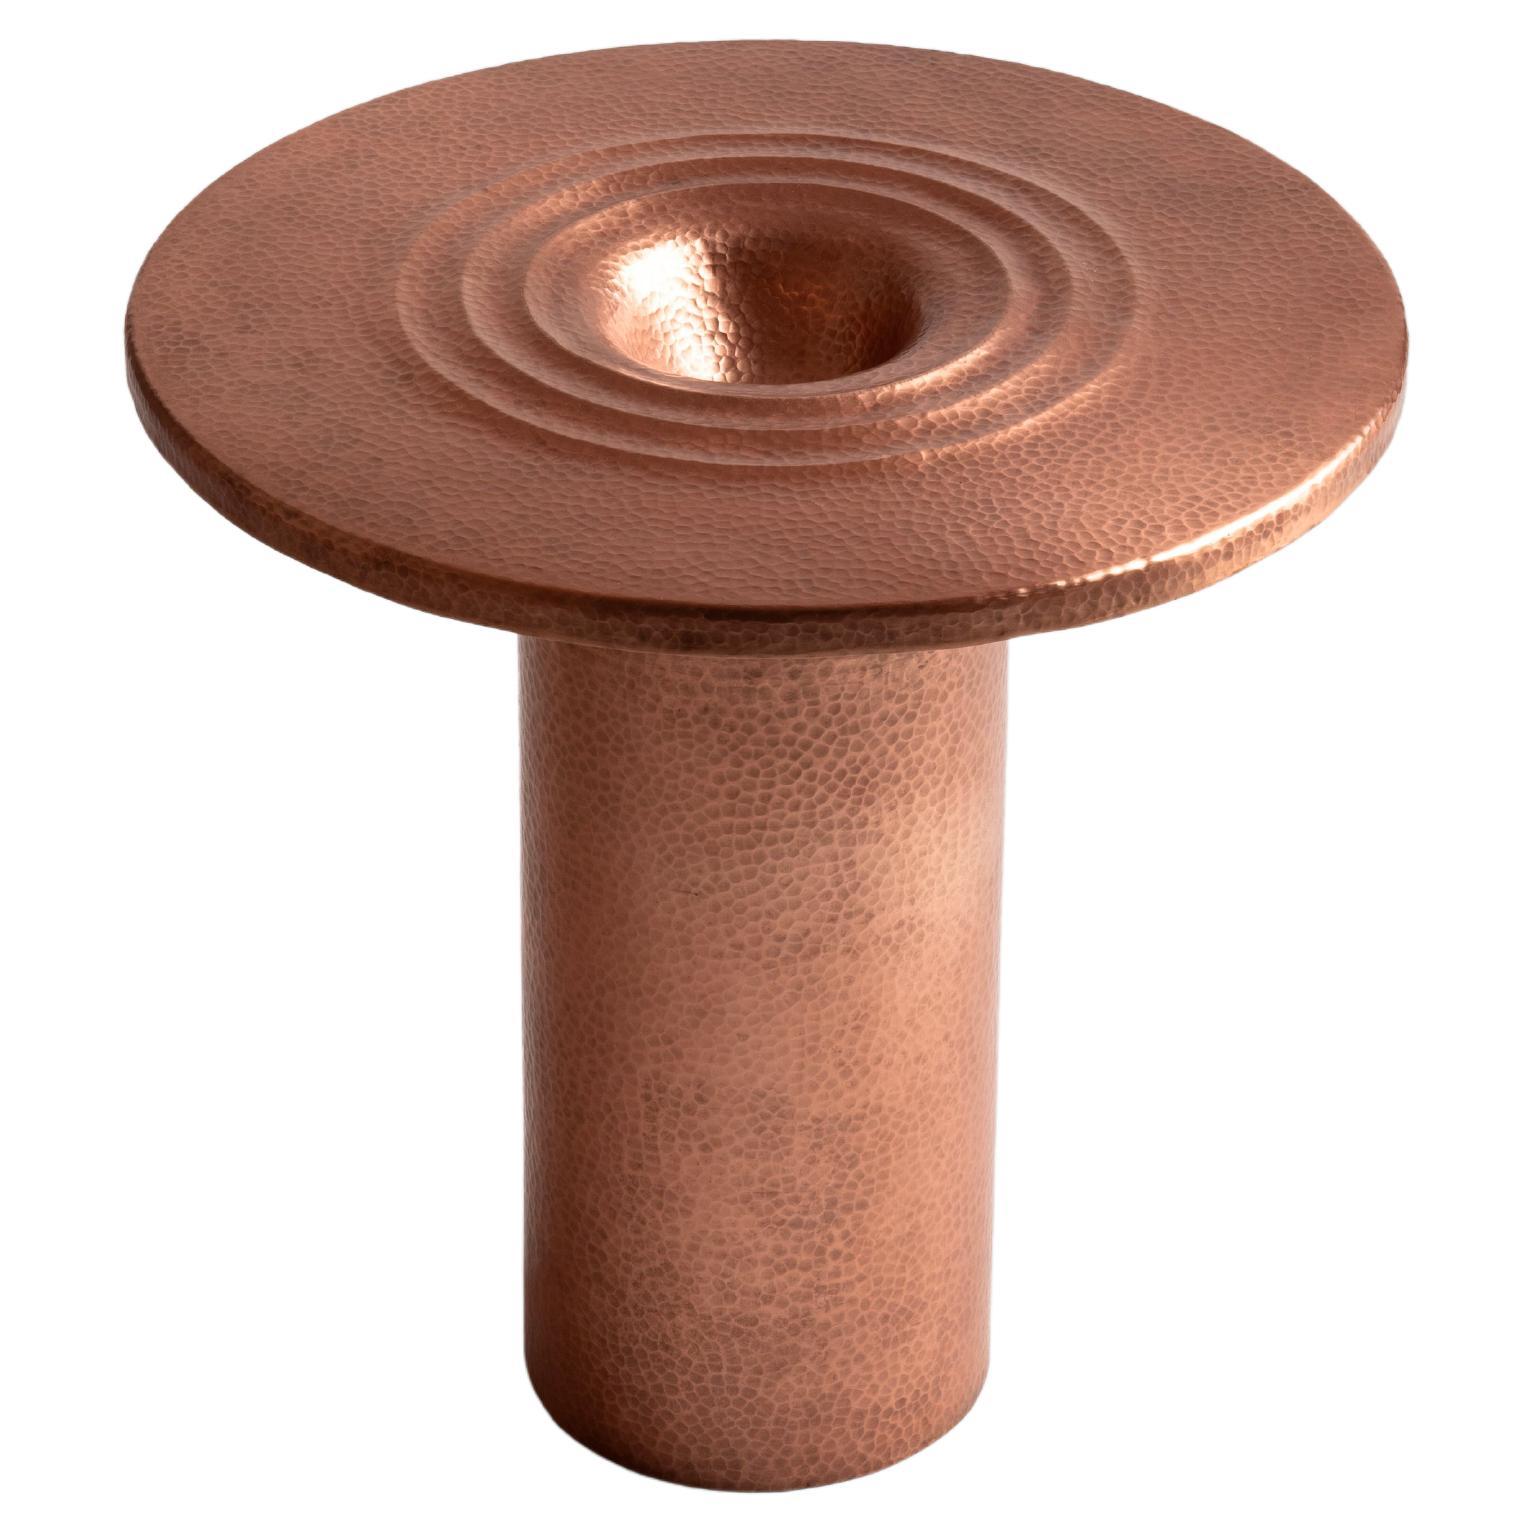 Contemporary side table, hammered copper, Mexican design by Sebastian Arroyo